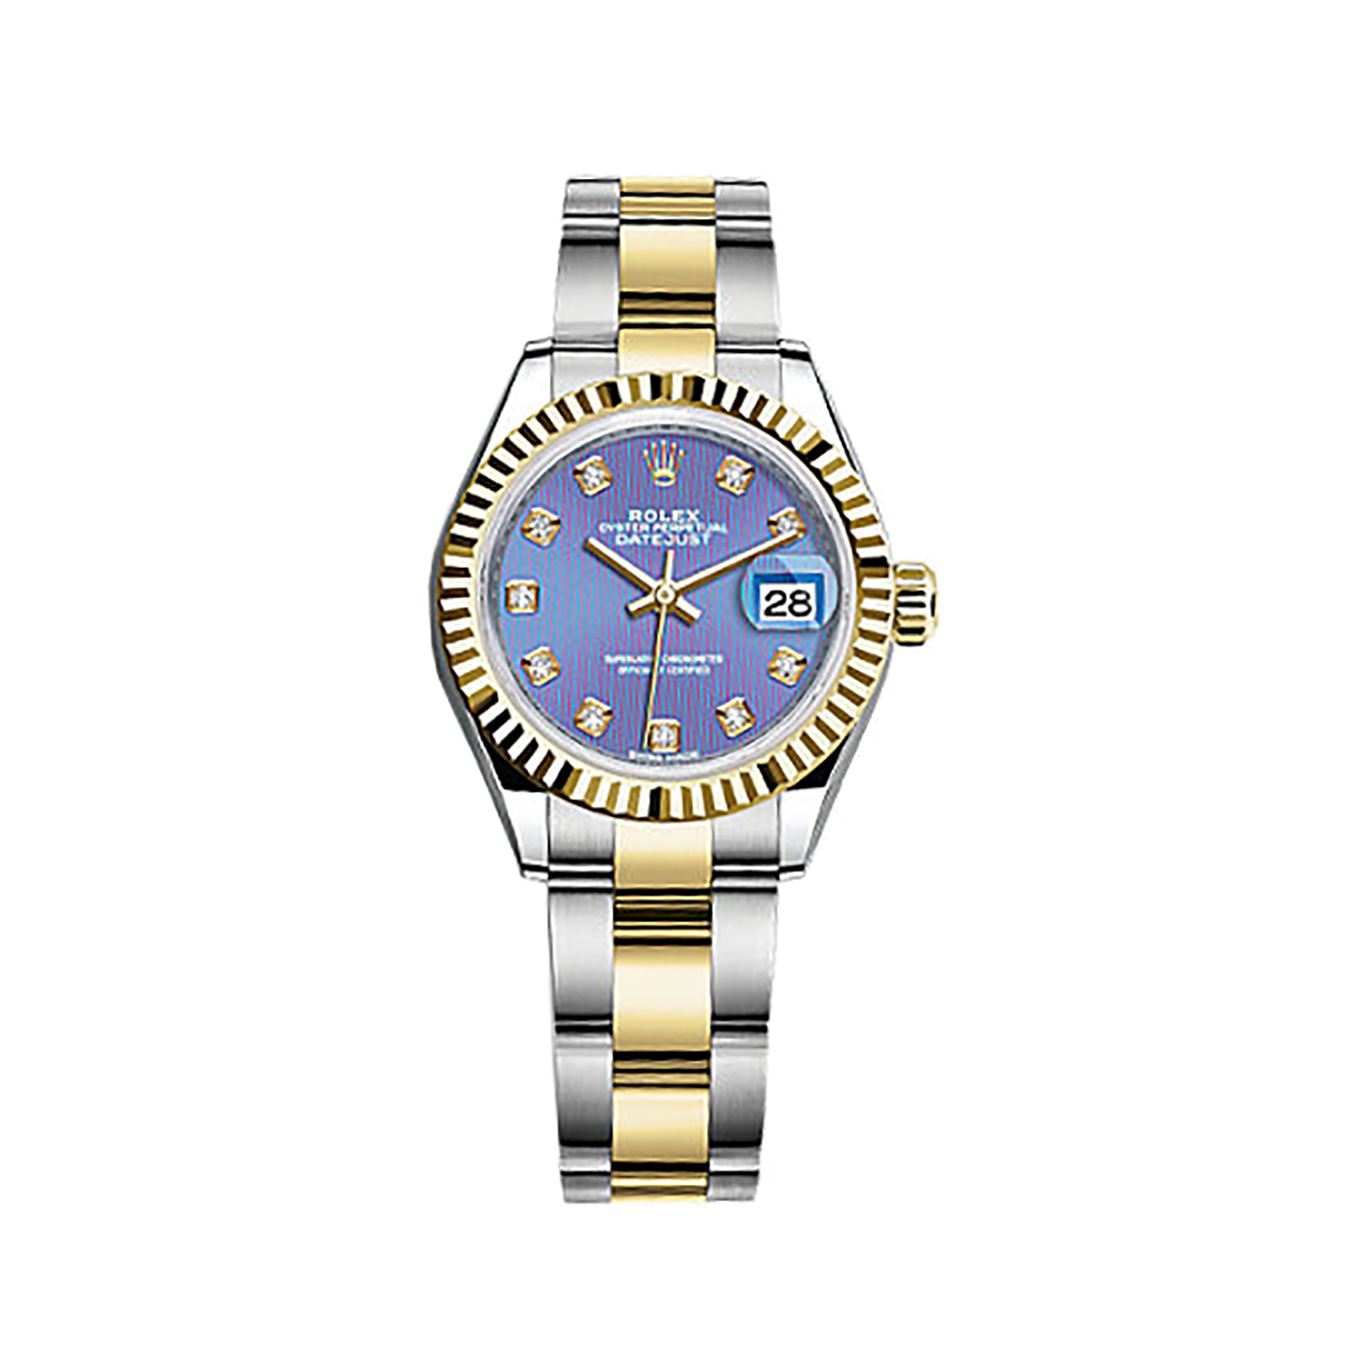 Lady-Datejust 28 279173 Gold & Stainless Steel Watch (Lavender Set with Diamonds)